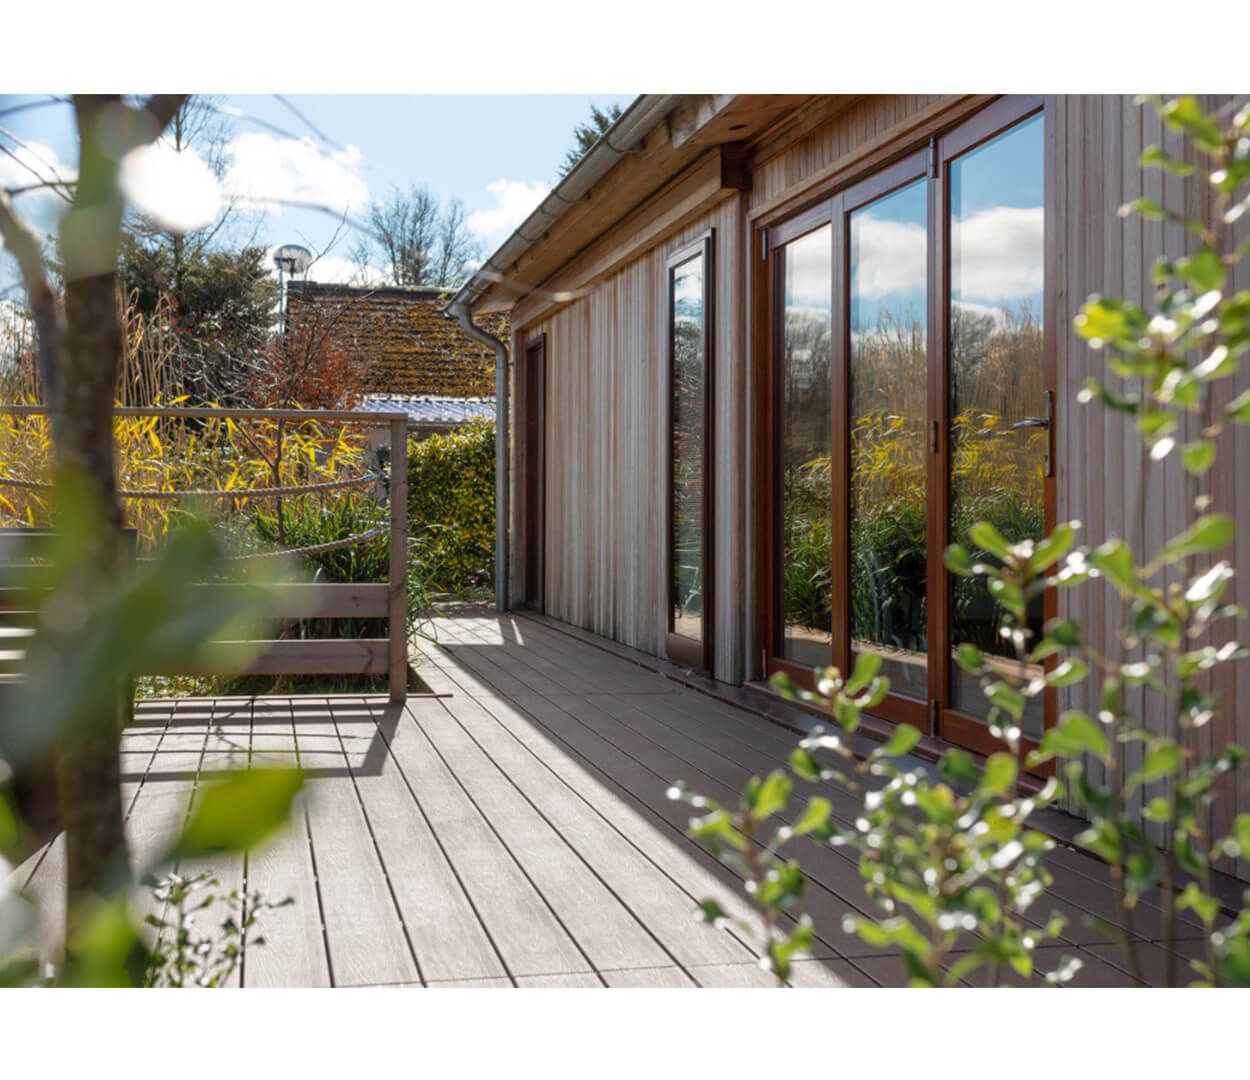 Luxury holiday retreats by Palstone Lodges use Cladco Woodgrain Effect and Original Composite Decking Boards